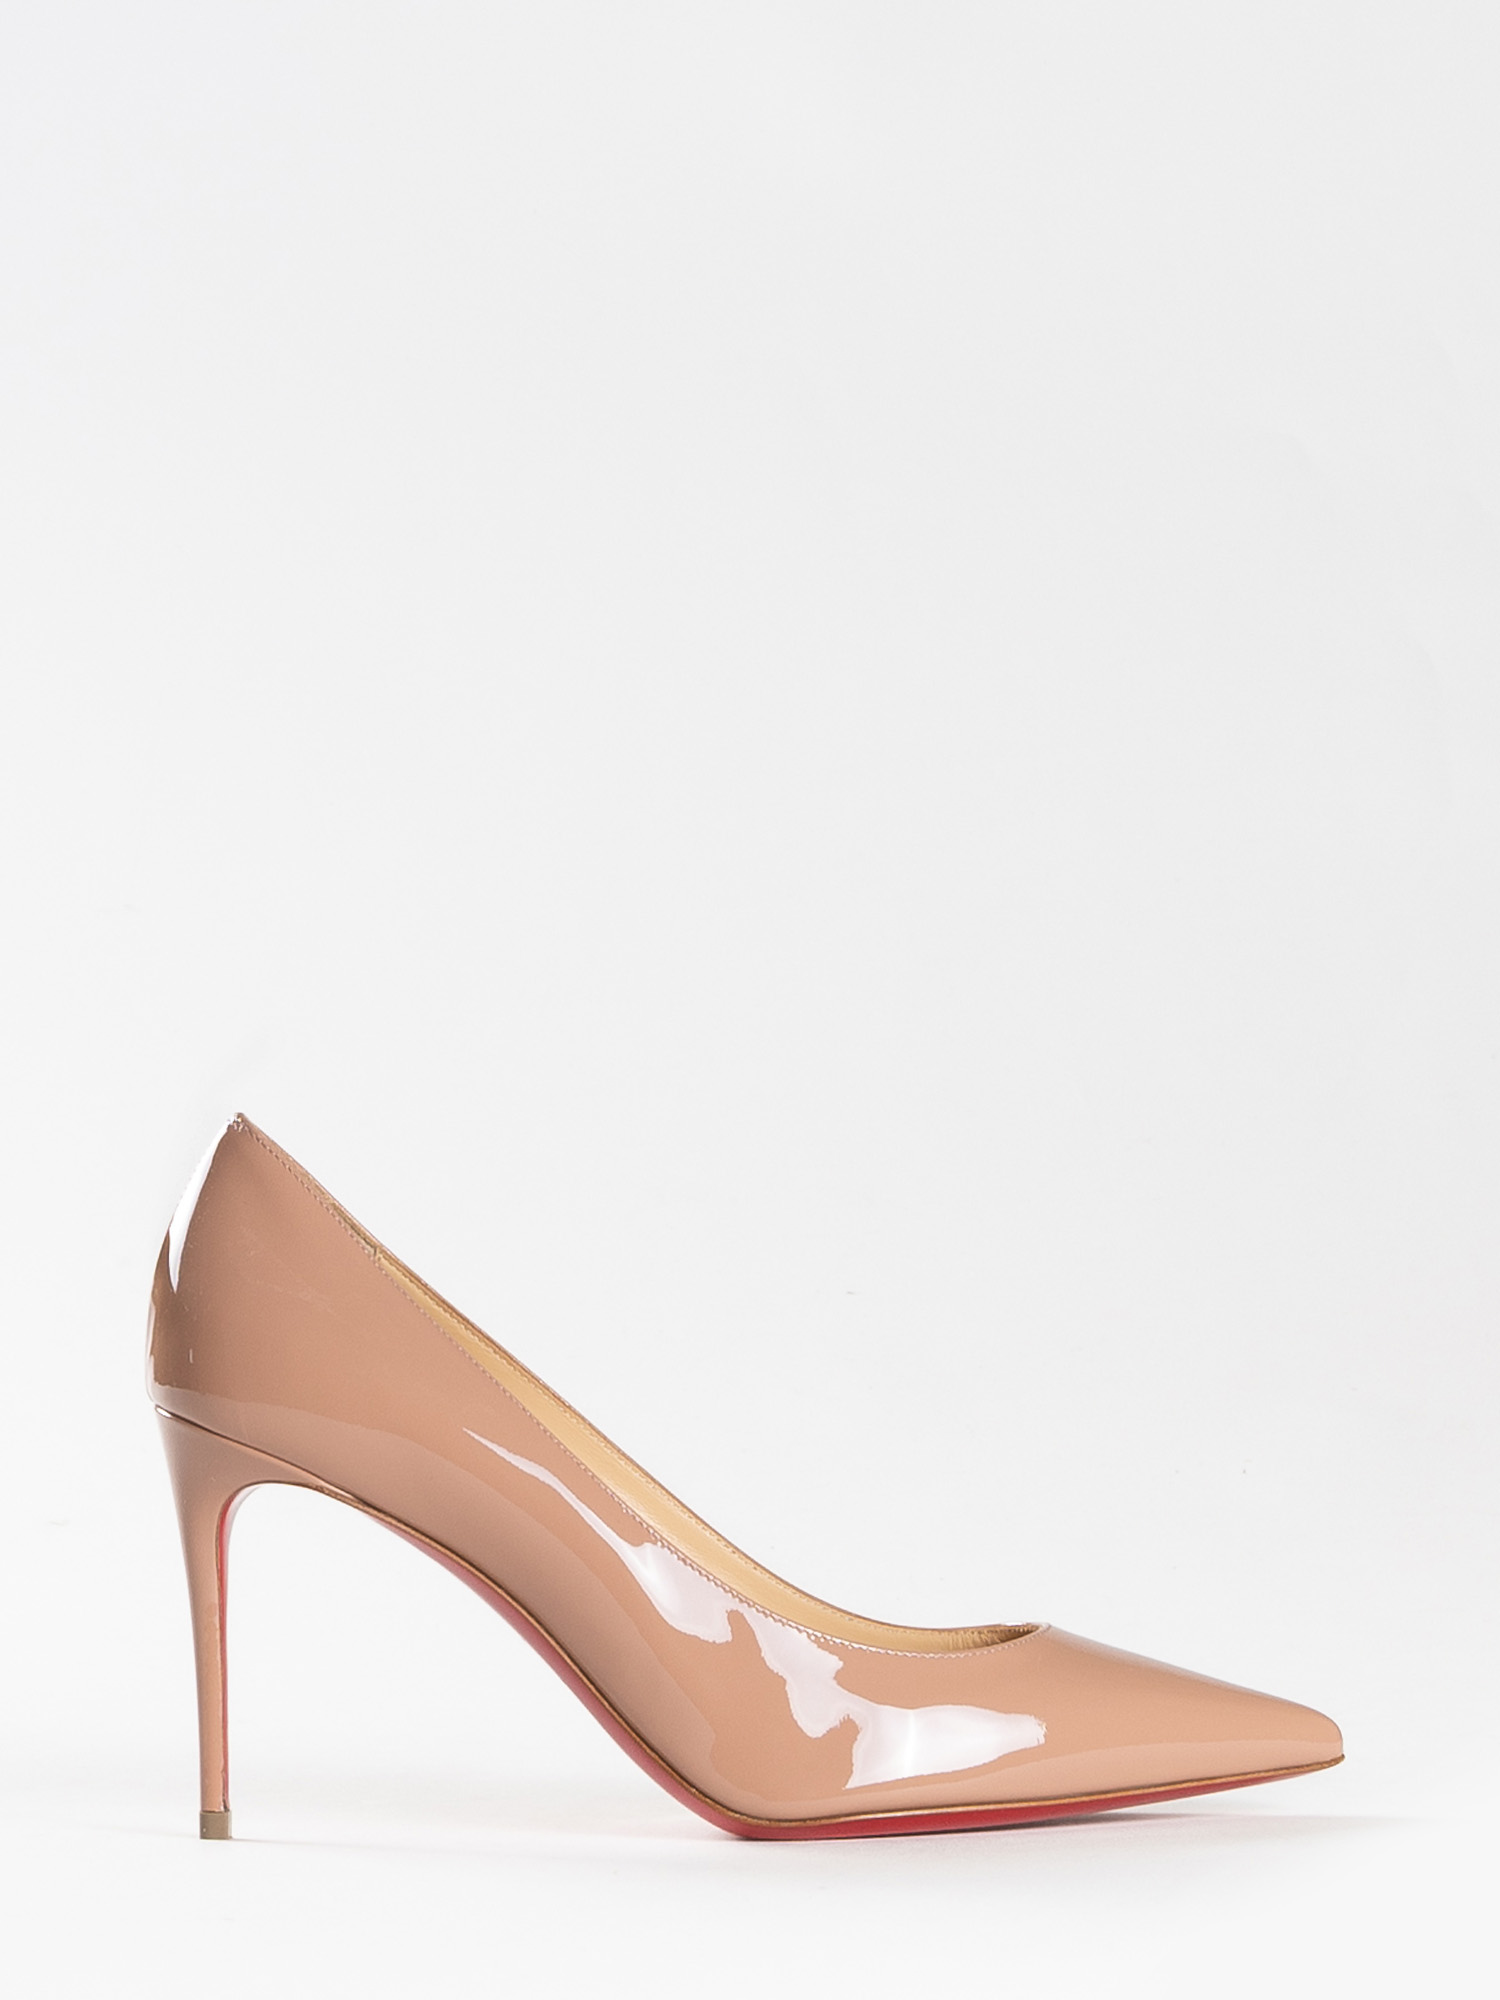 PATENT LEATHER SHOES - CHRISTIAN LOUBOUTIN